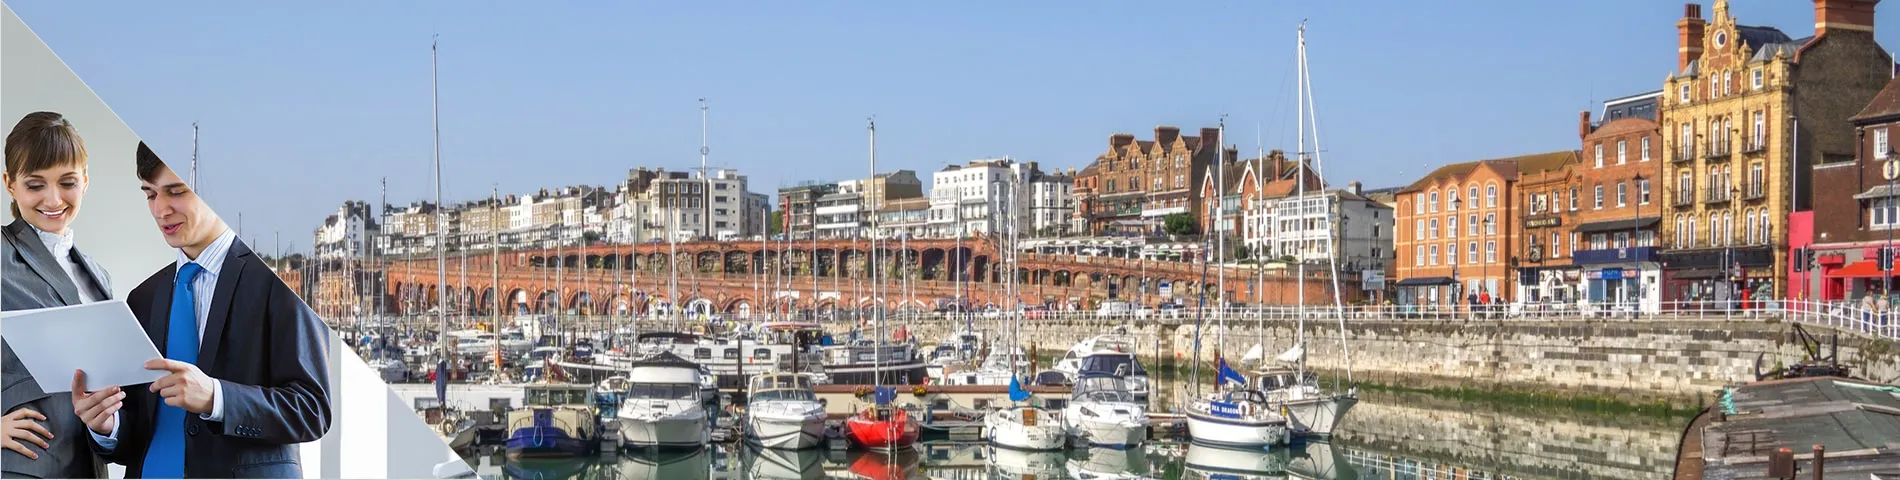 Ramsgate - Business One-to-One